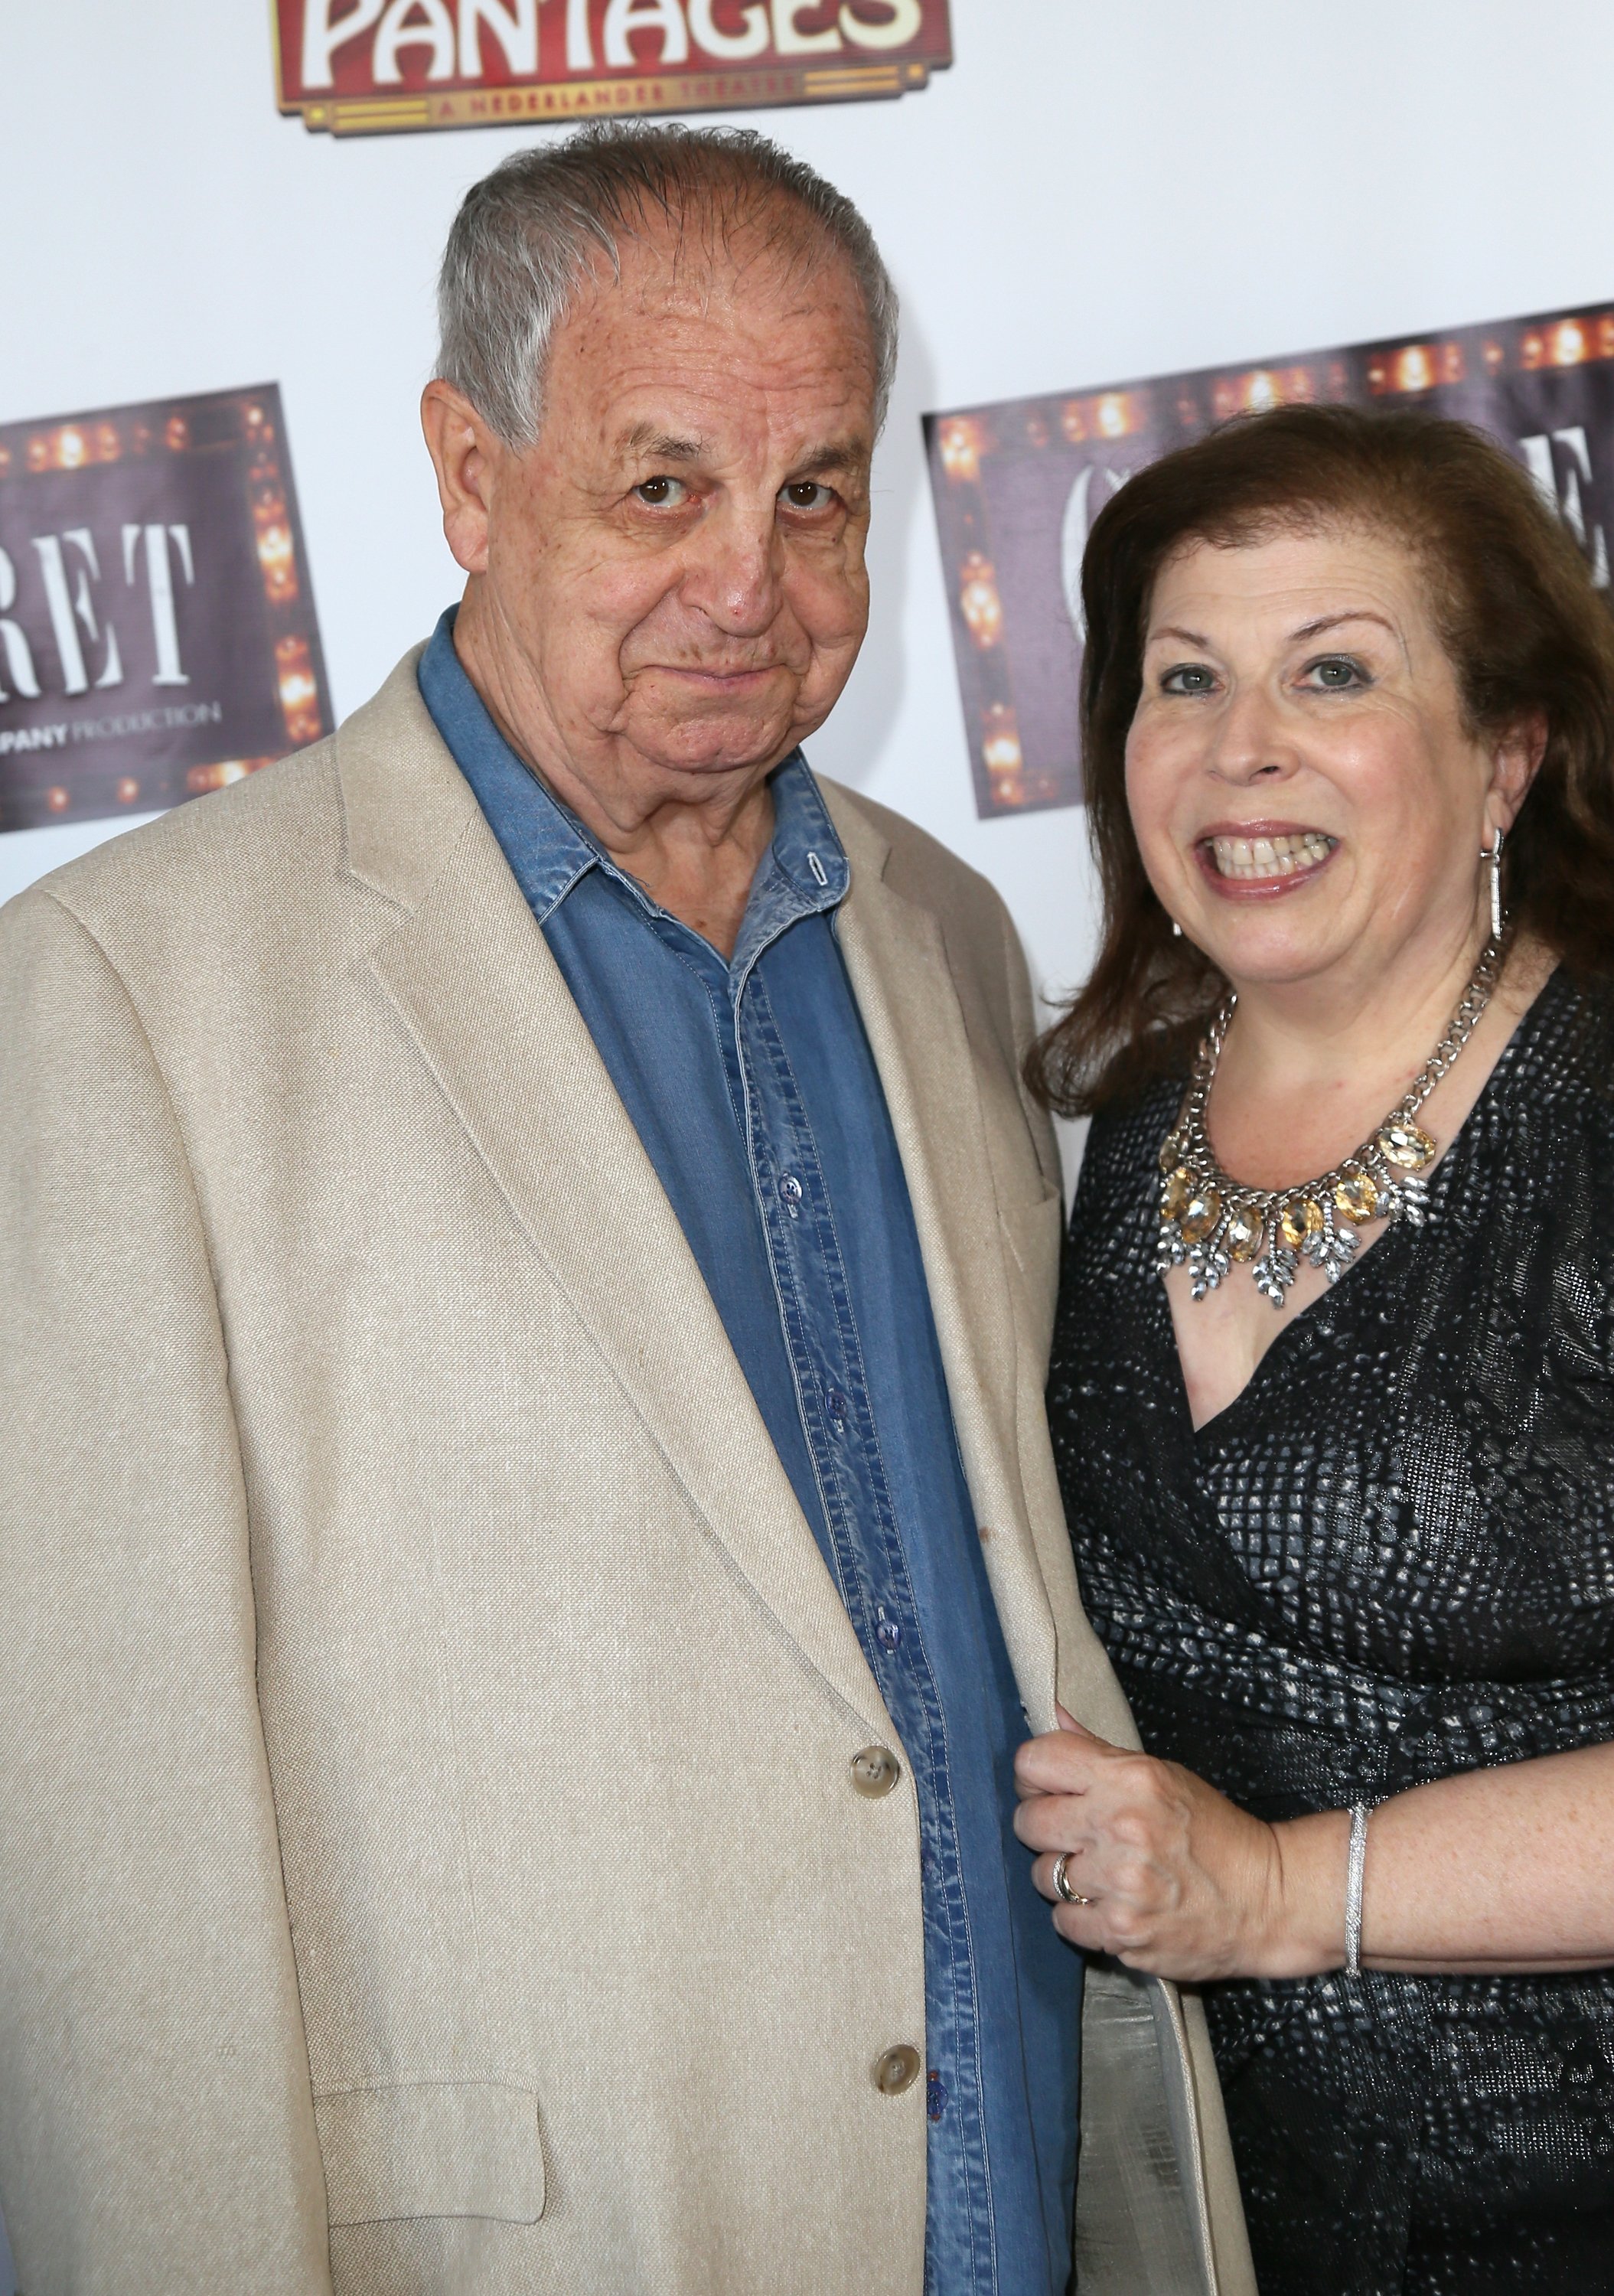 Paul Dooley (L) and Winnie Holzman arrive at the opening of "Cabaret" at the Pantages Theatre on July 20, 2016 in Hollywood, California | Source: Getty Images 